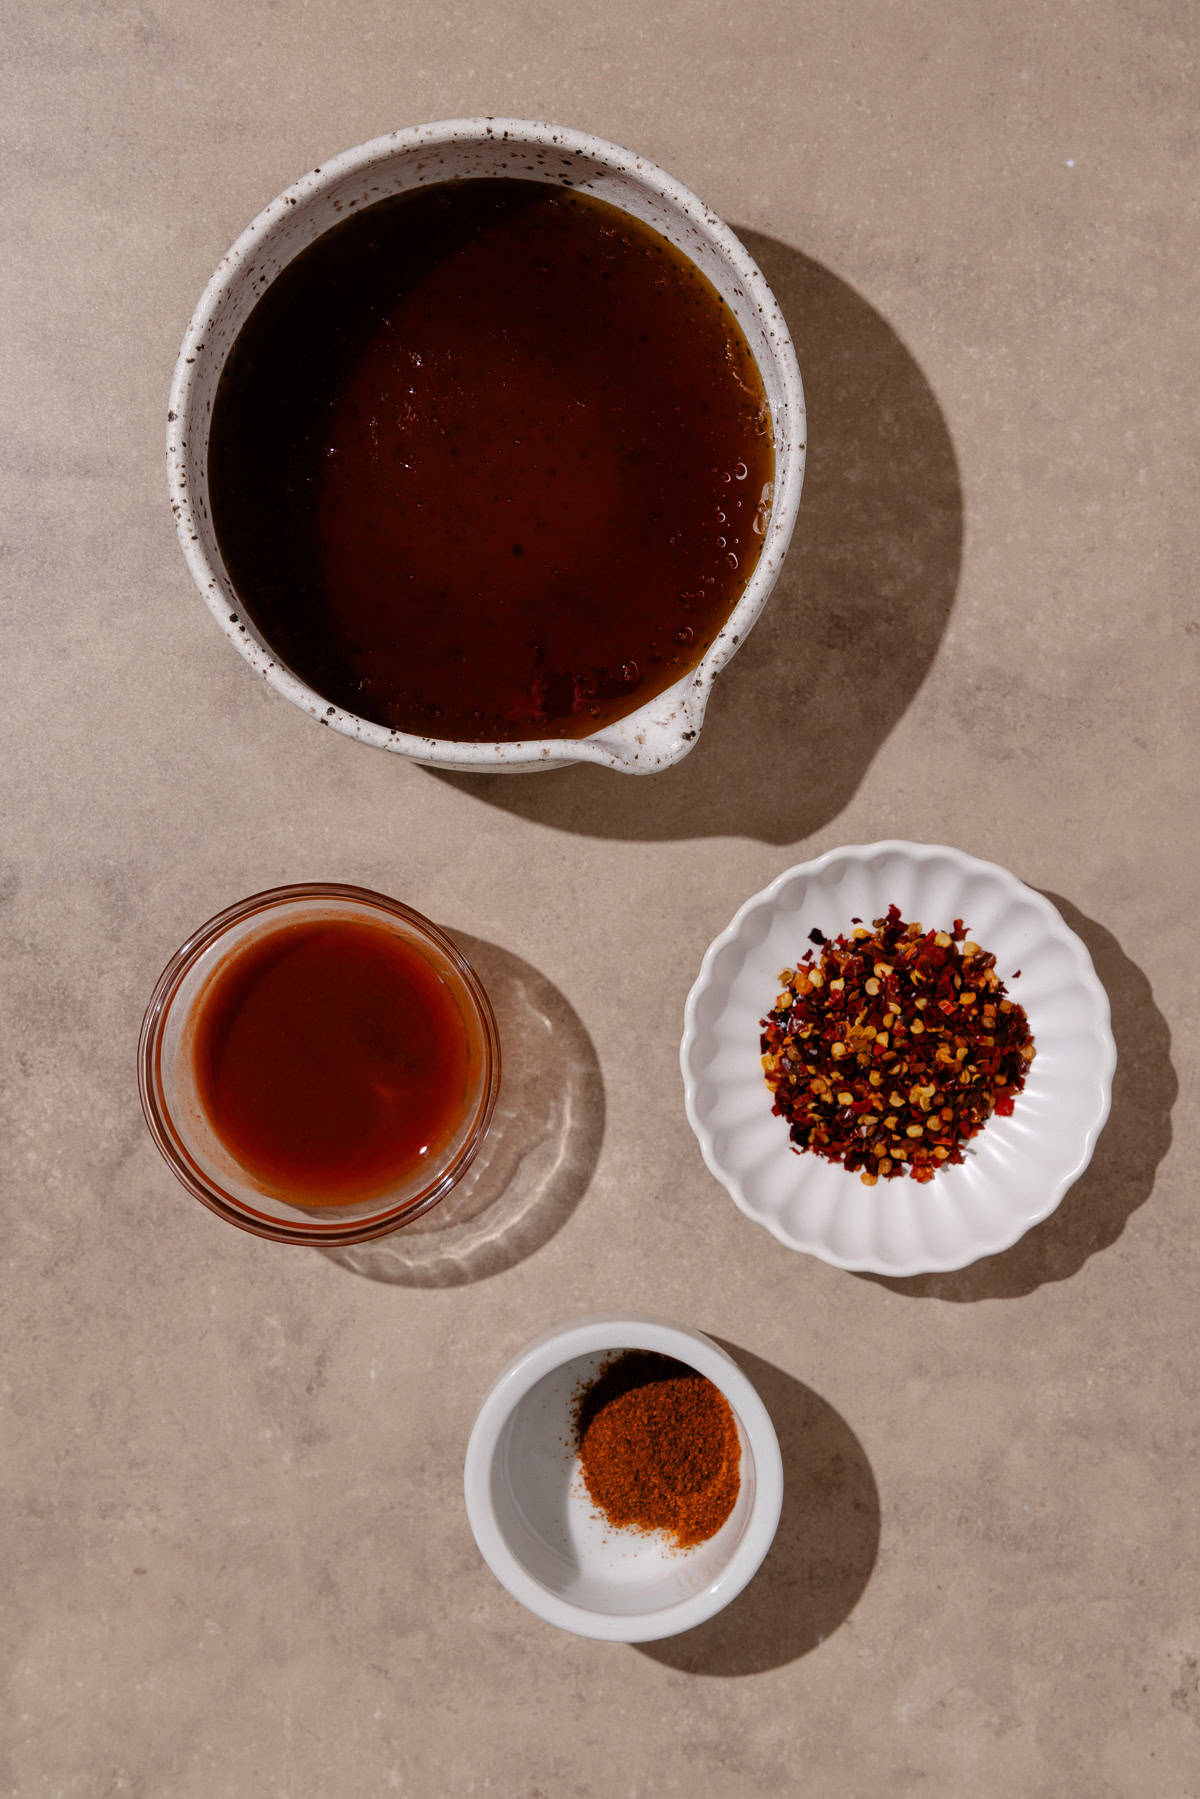 Hot honey ingredients, which include honey, red pepper flakes, cayenne pepper and hot sauce.